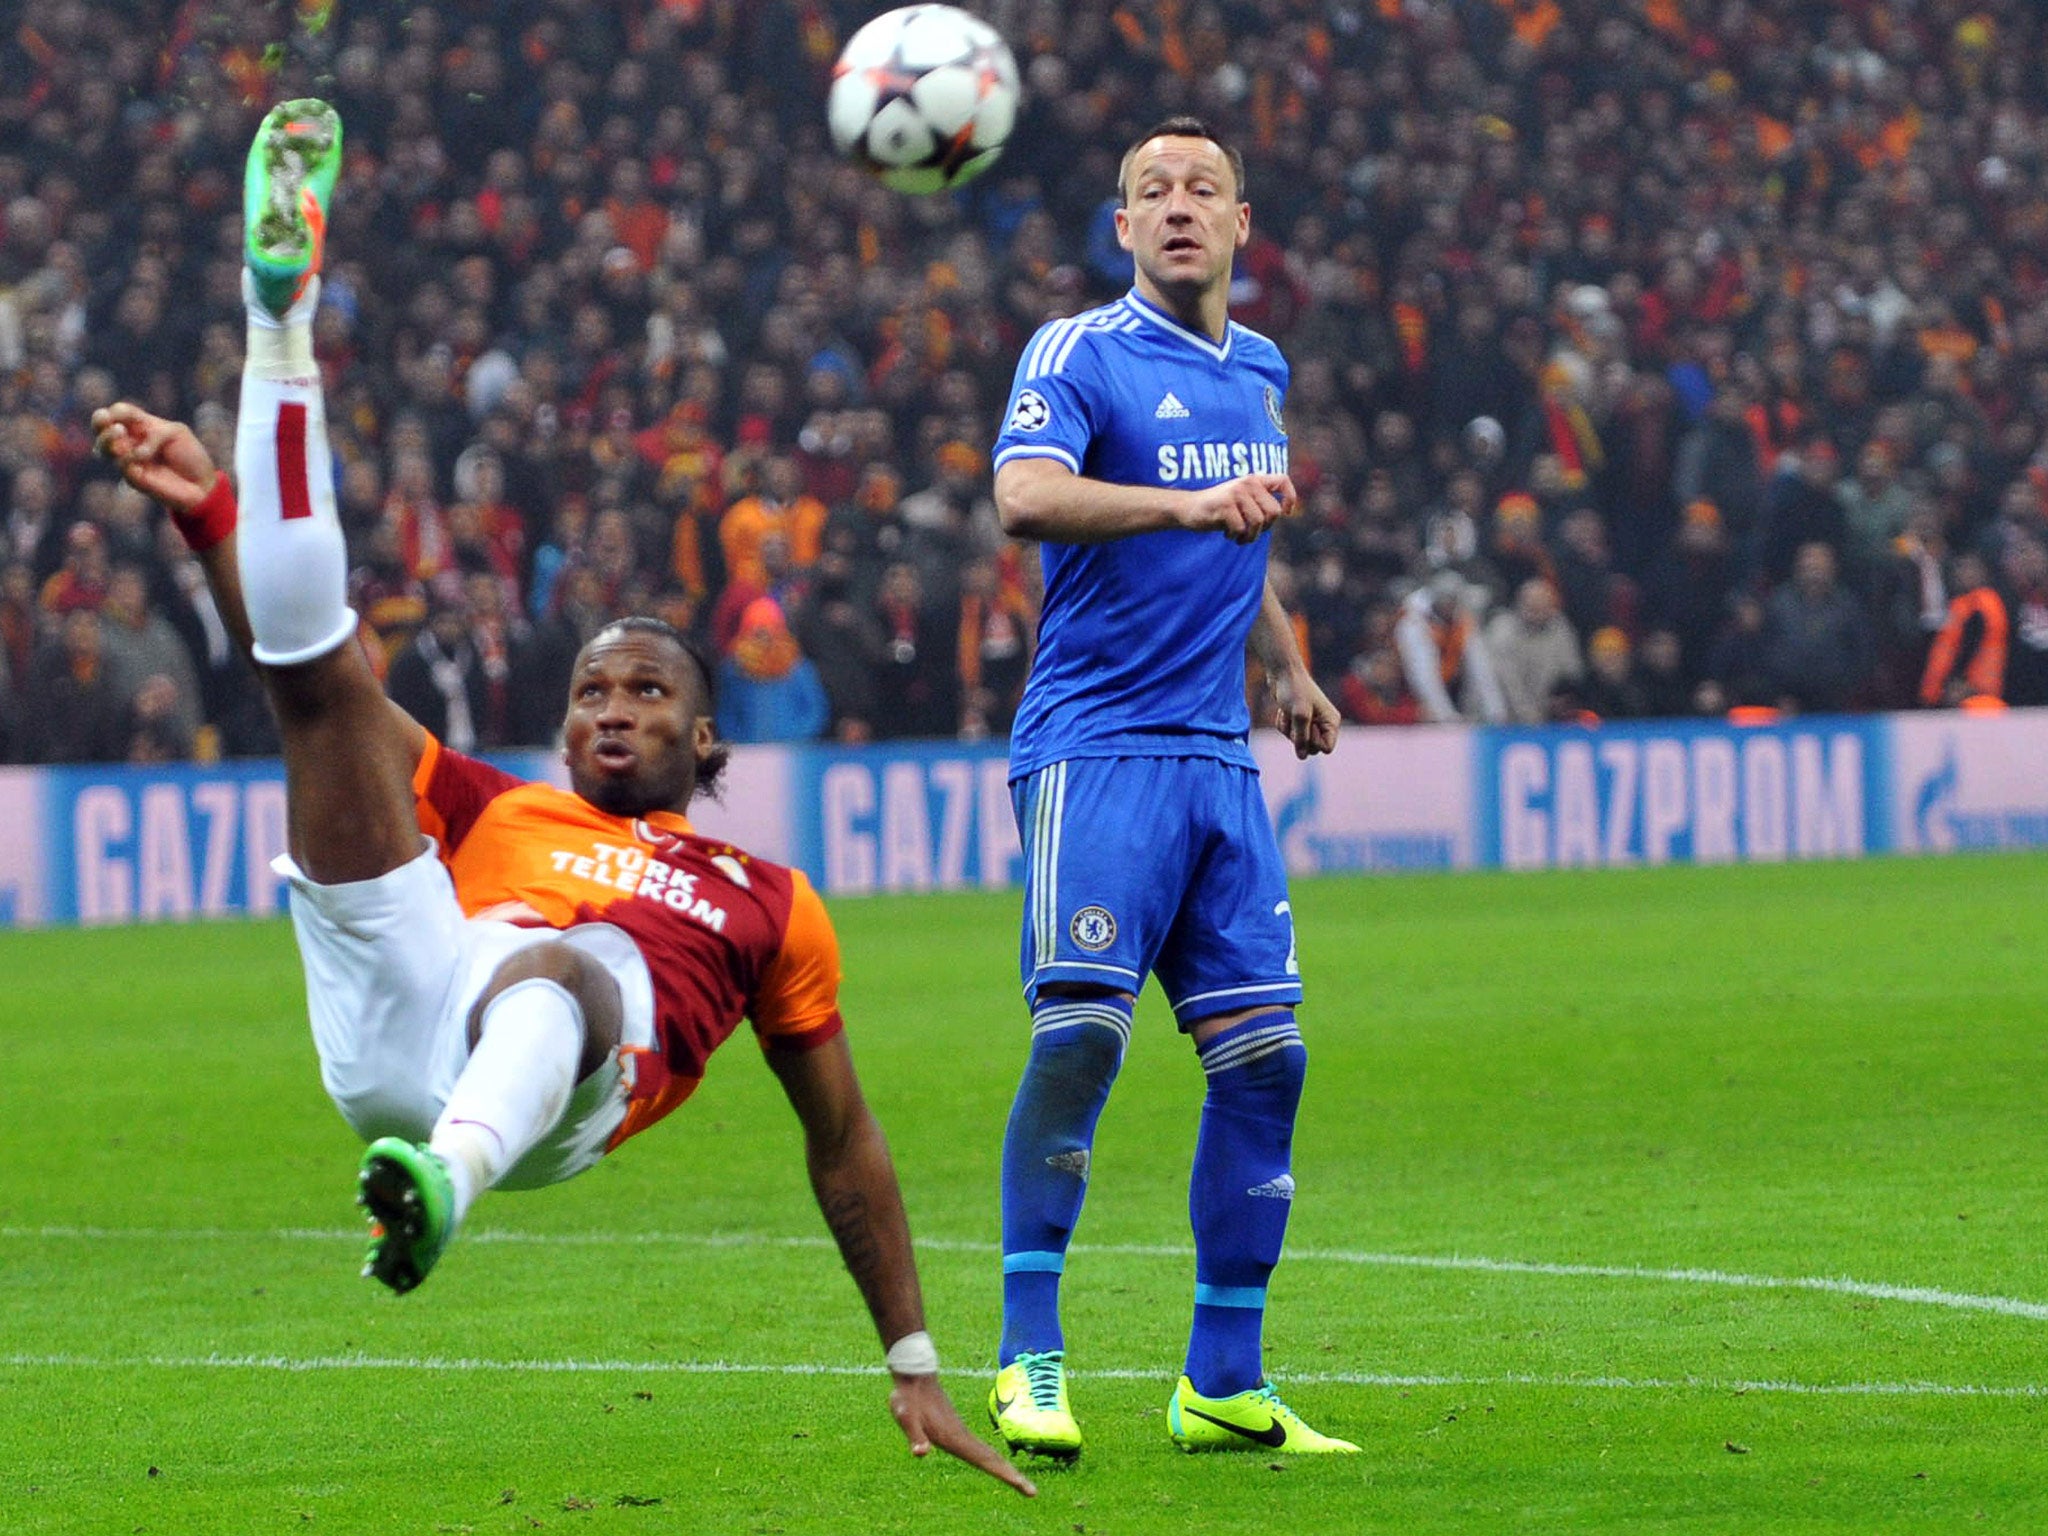 Didier Drogba in action for Galatasaray against former club Chelsea